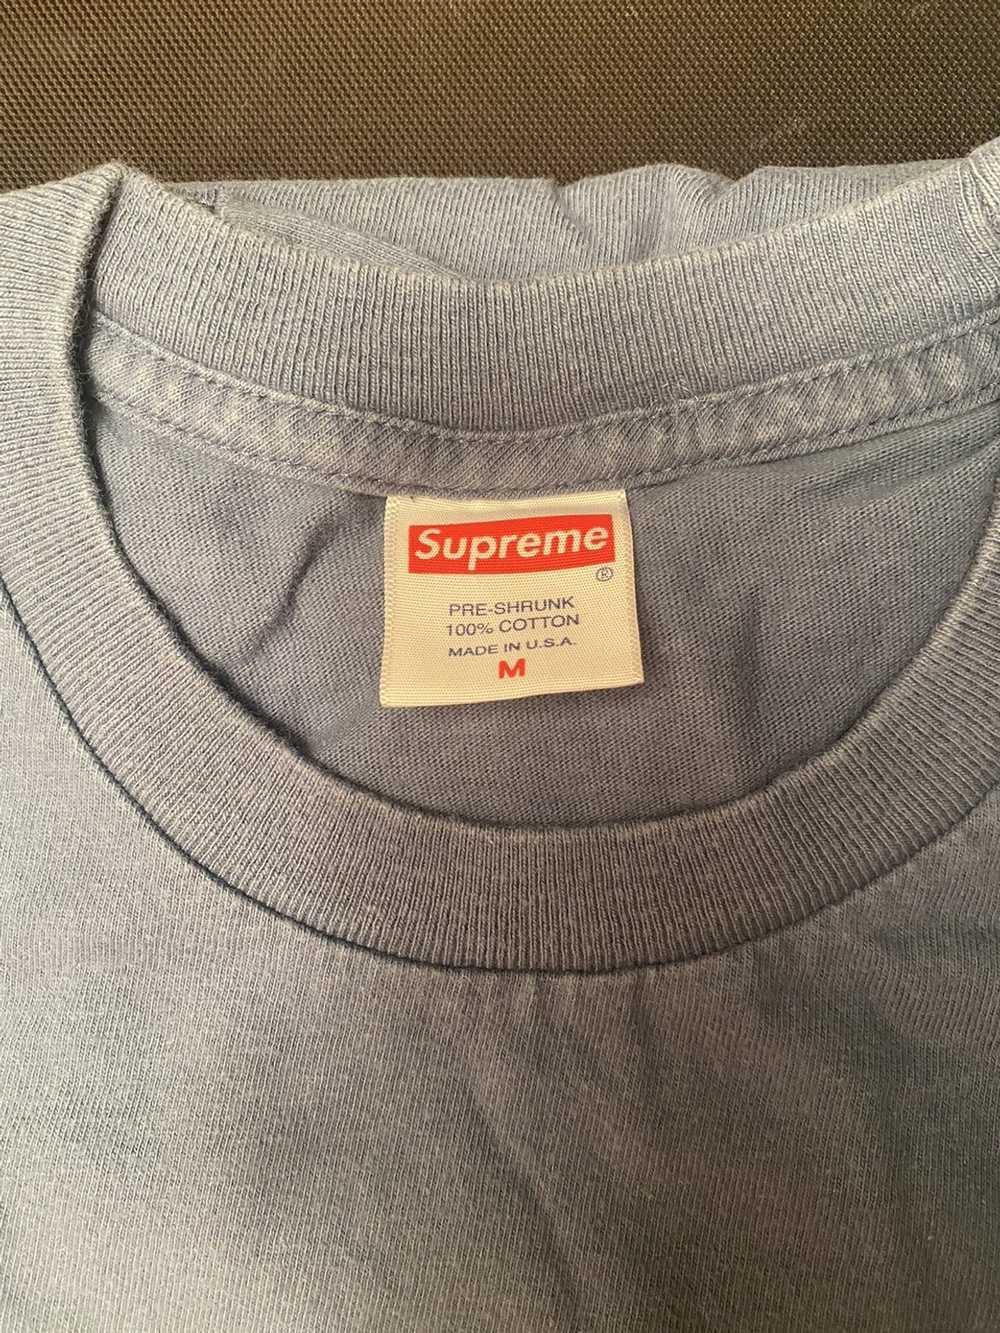 Supreme Mike Kelley Hiding From Indians Tee - image 2